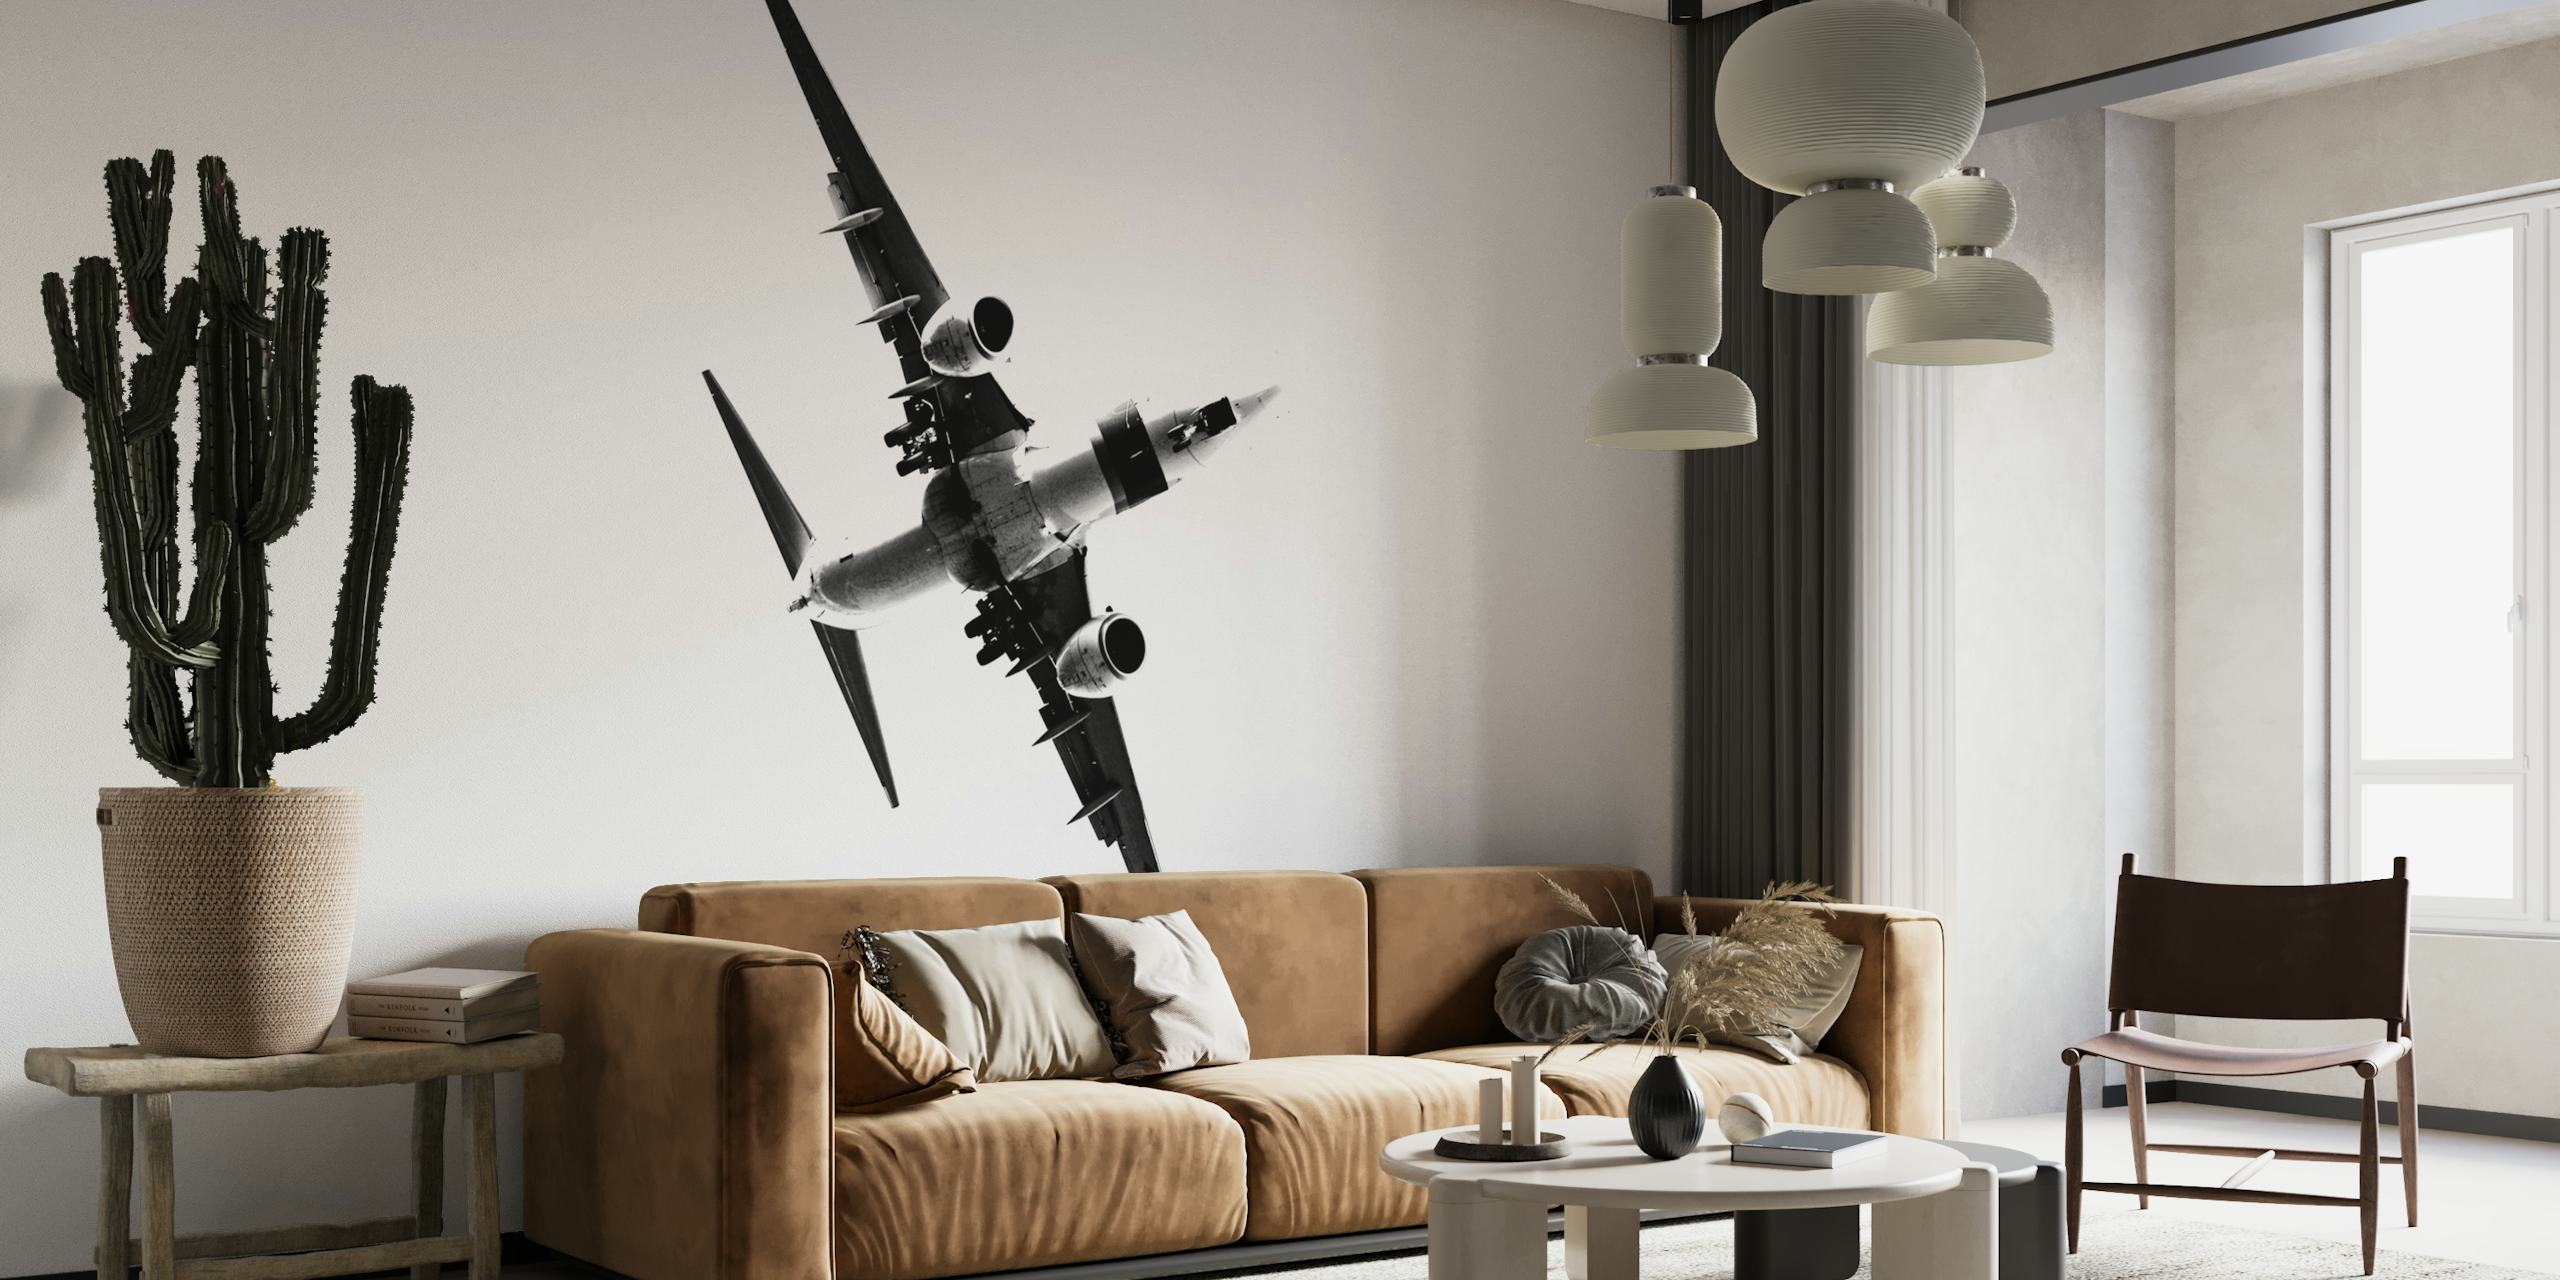 Black and white wall mural of a stylized airplane ascending symbolizing progress and ambition